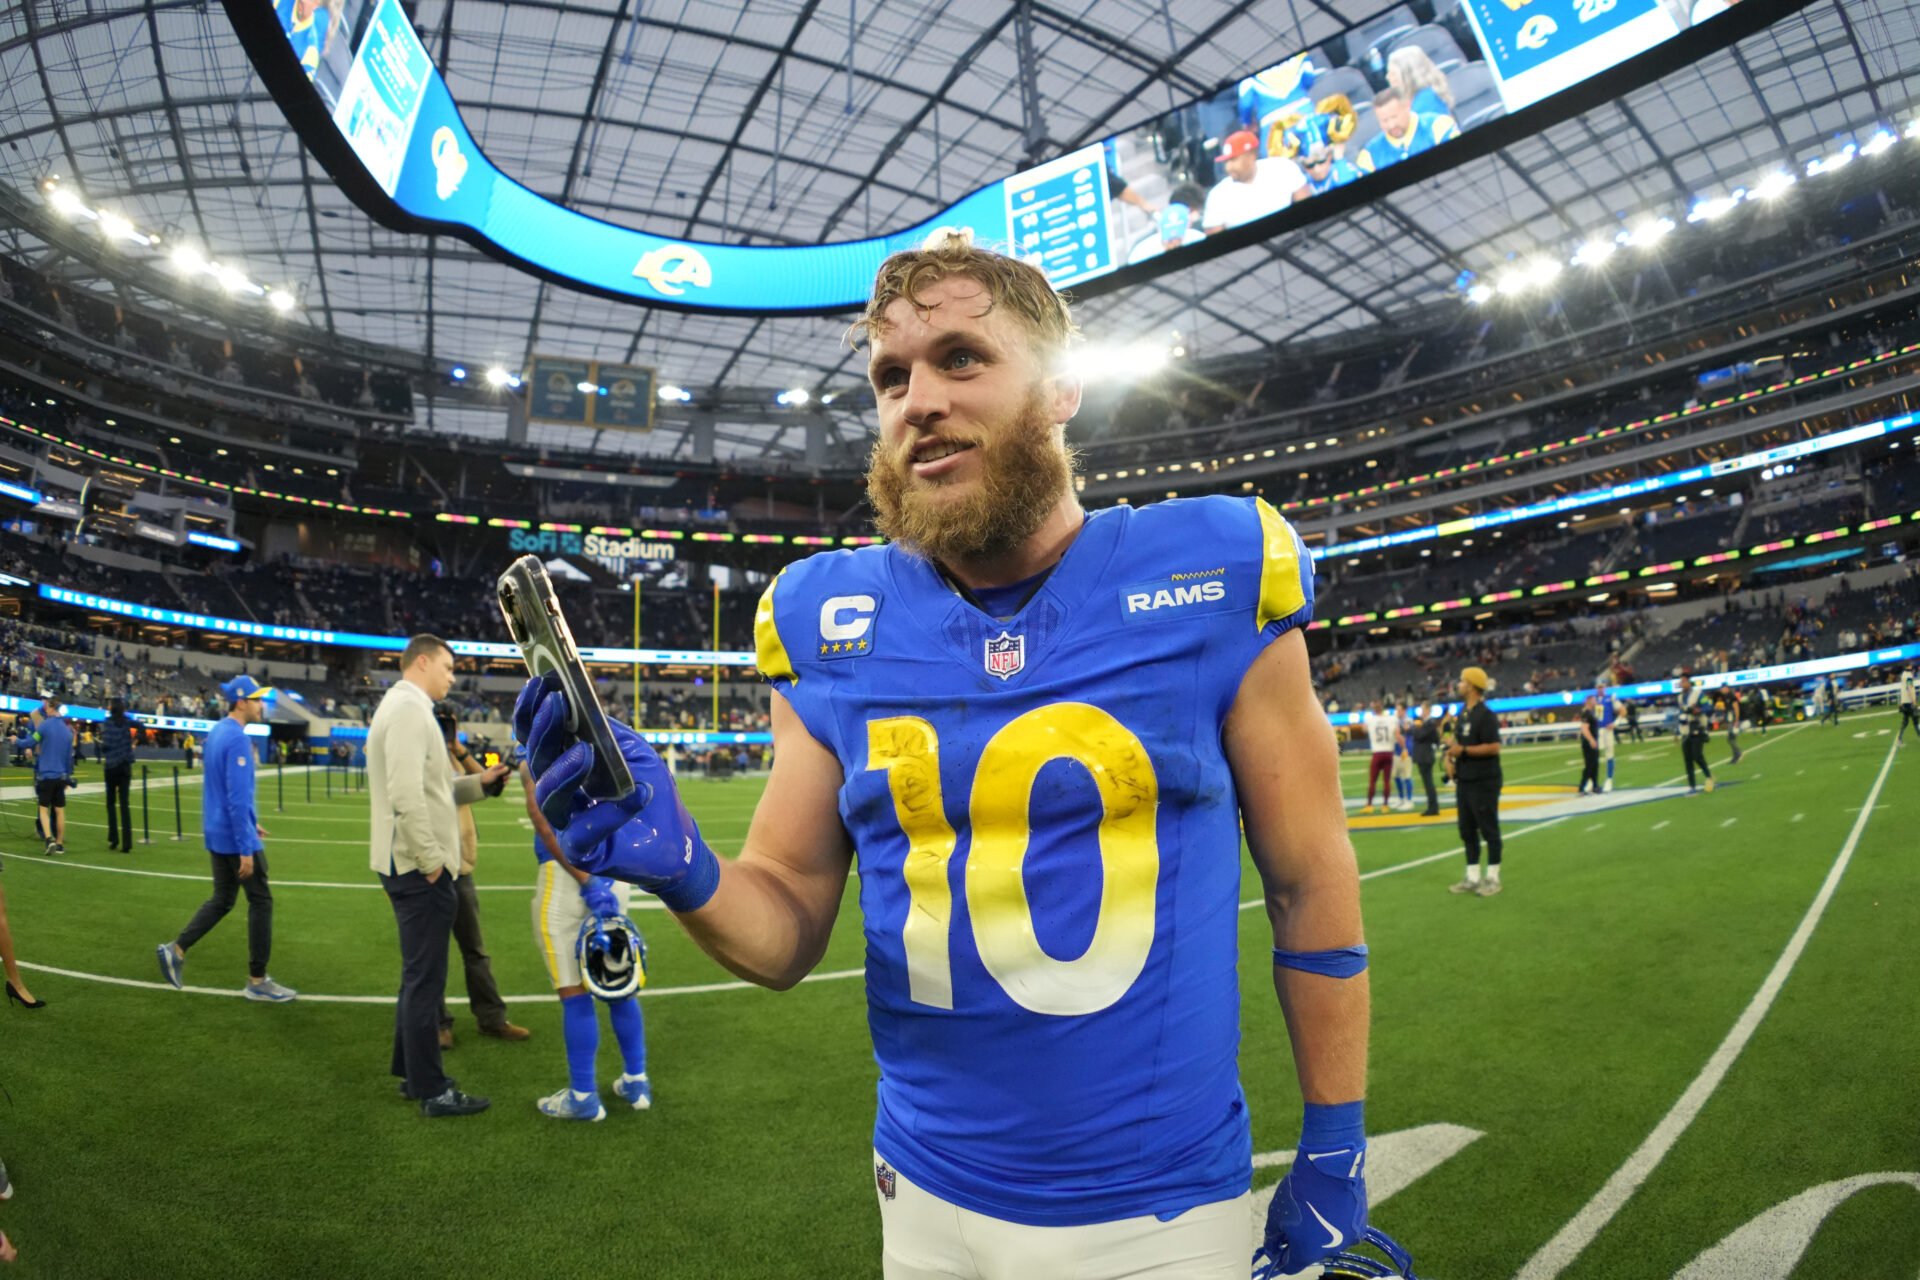 Los Angeles Rams wide receiver Cooper Kupp (10) leaves the field after the game against the Washington Commanders at SoFi Stadium.